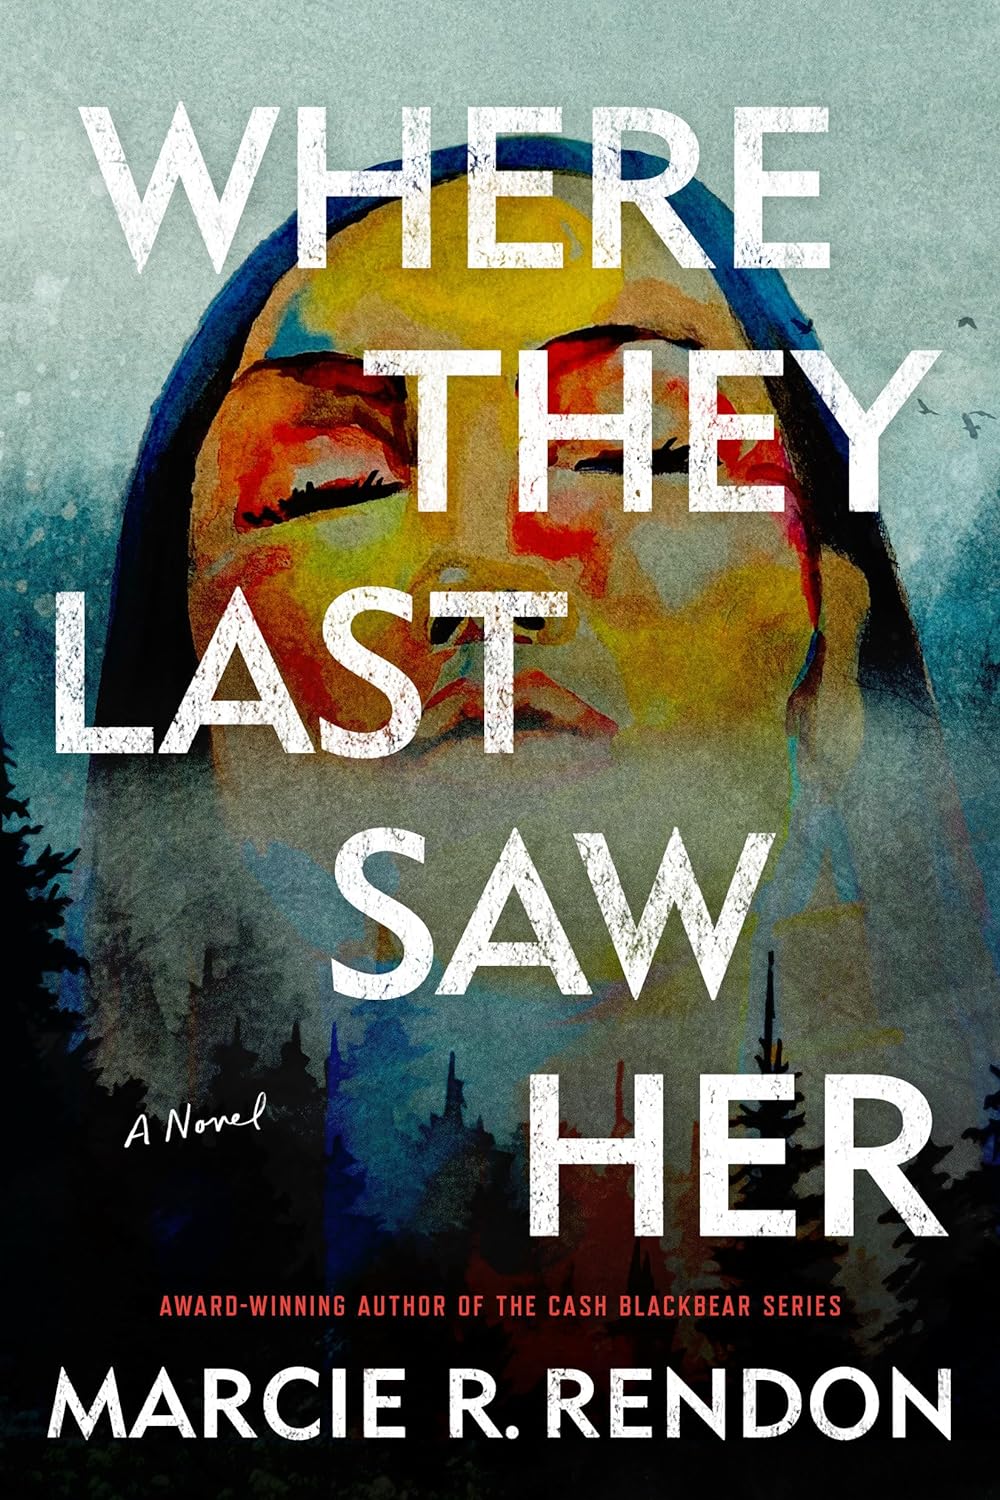 Where They Last Saw Her by Marcie R. Rendon